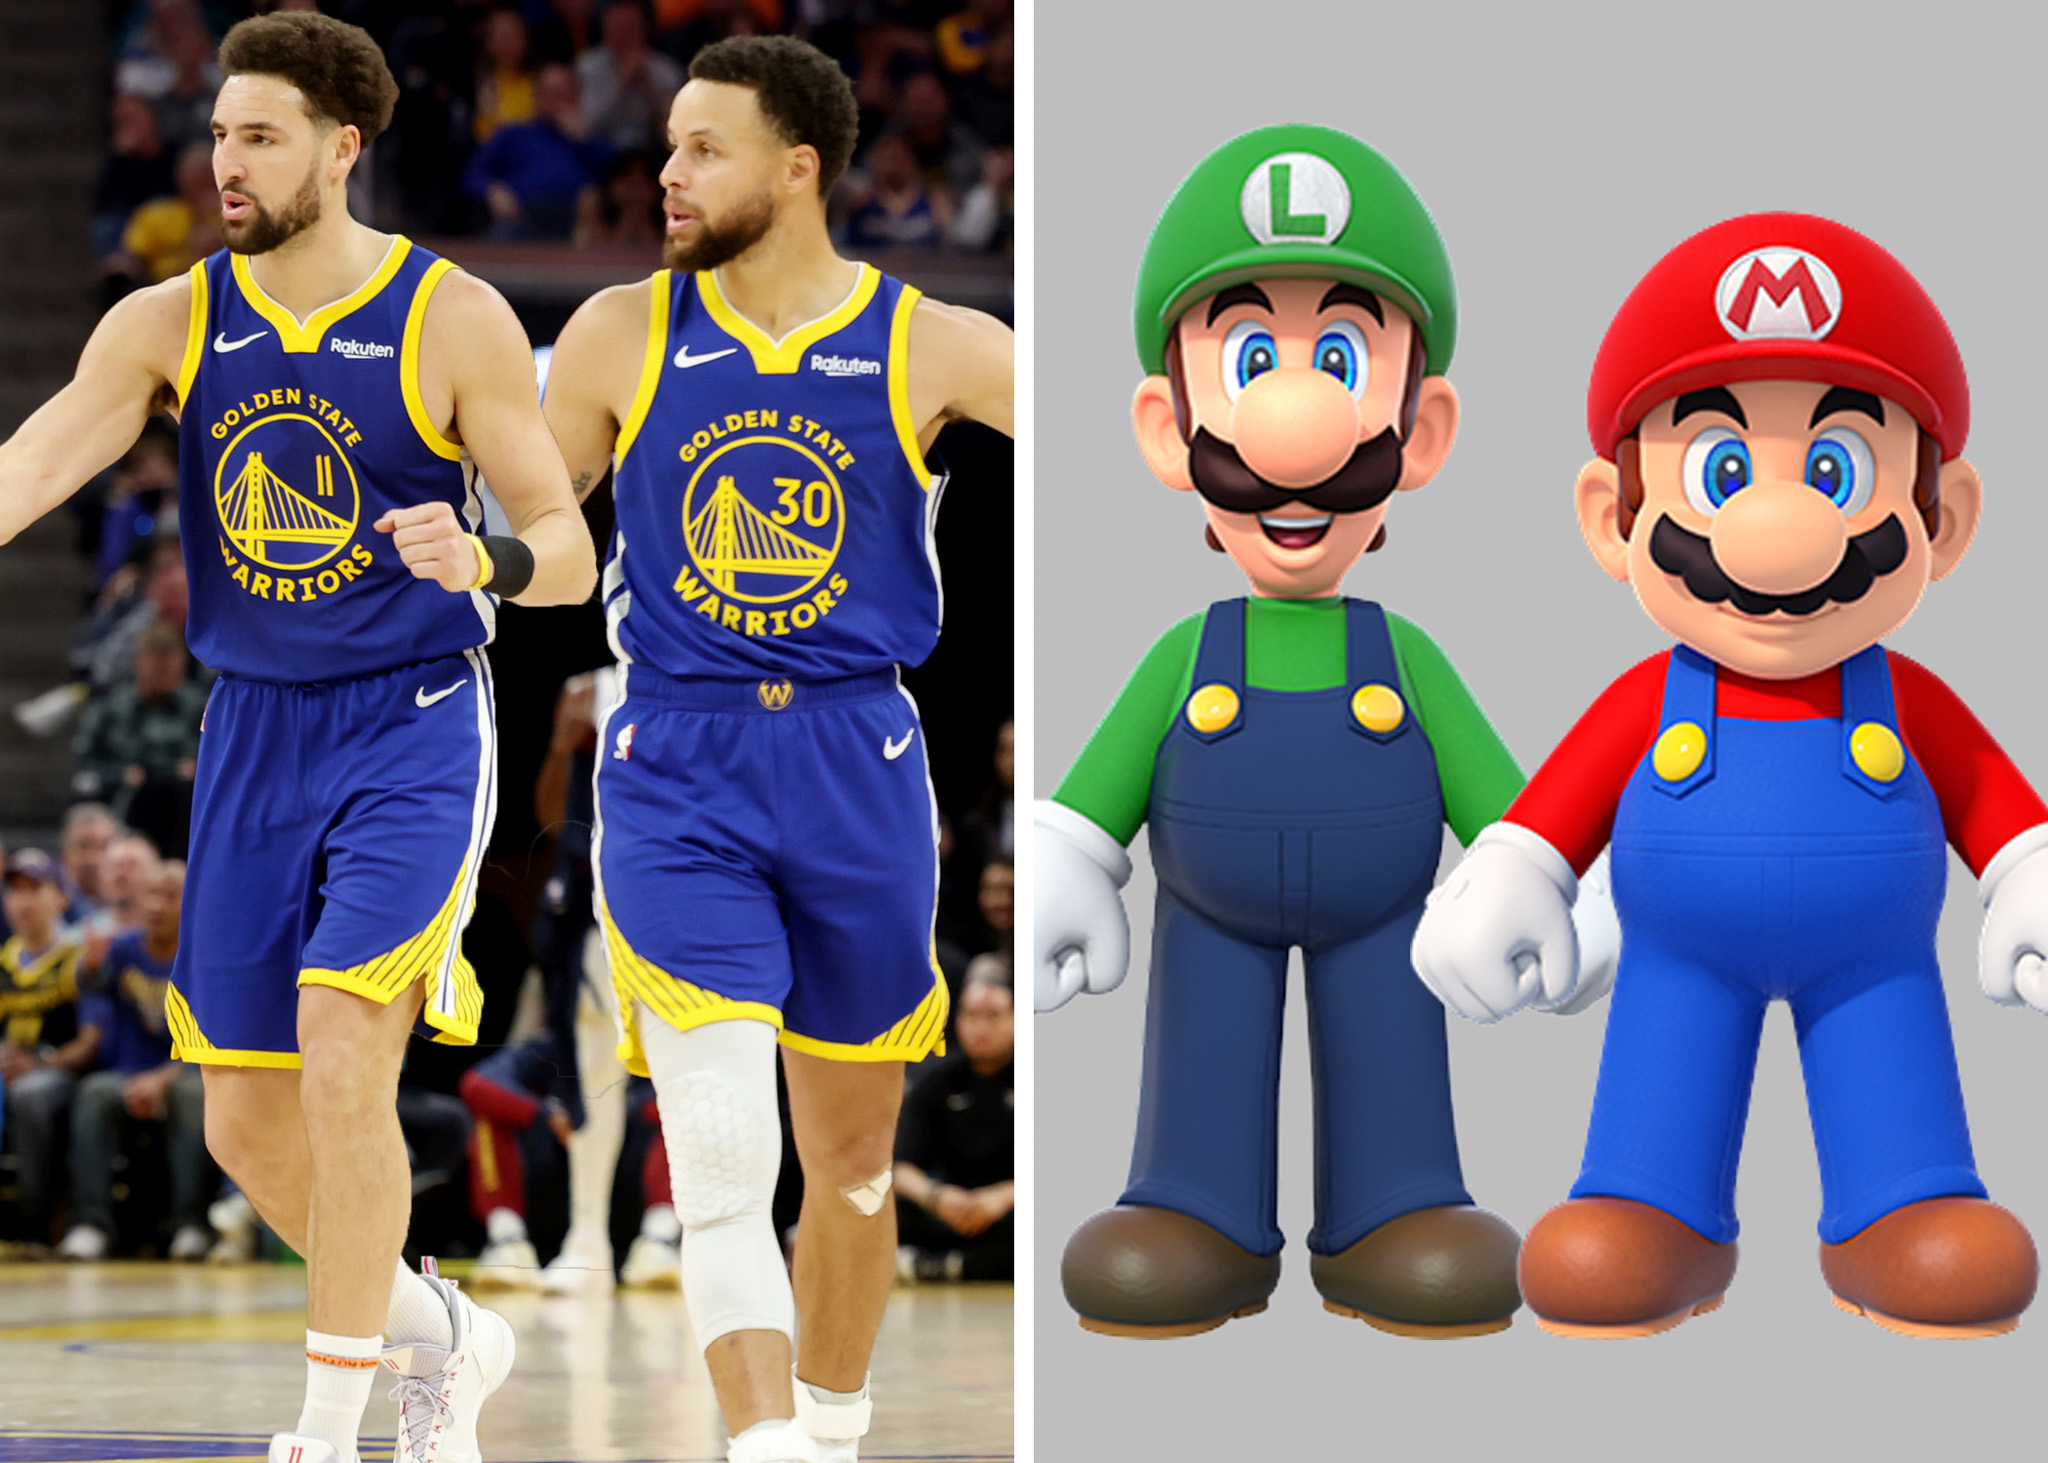 The image is split into two. On the left, two basketball players in blue Golden State Warriors jerseys walk on a court. On the right, there's Luigi in green and Mario in red.